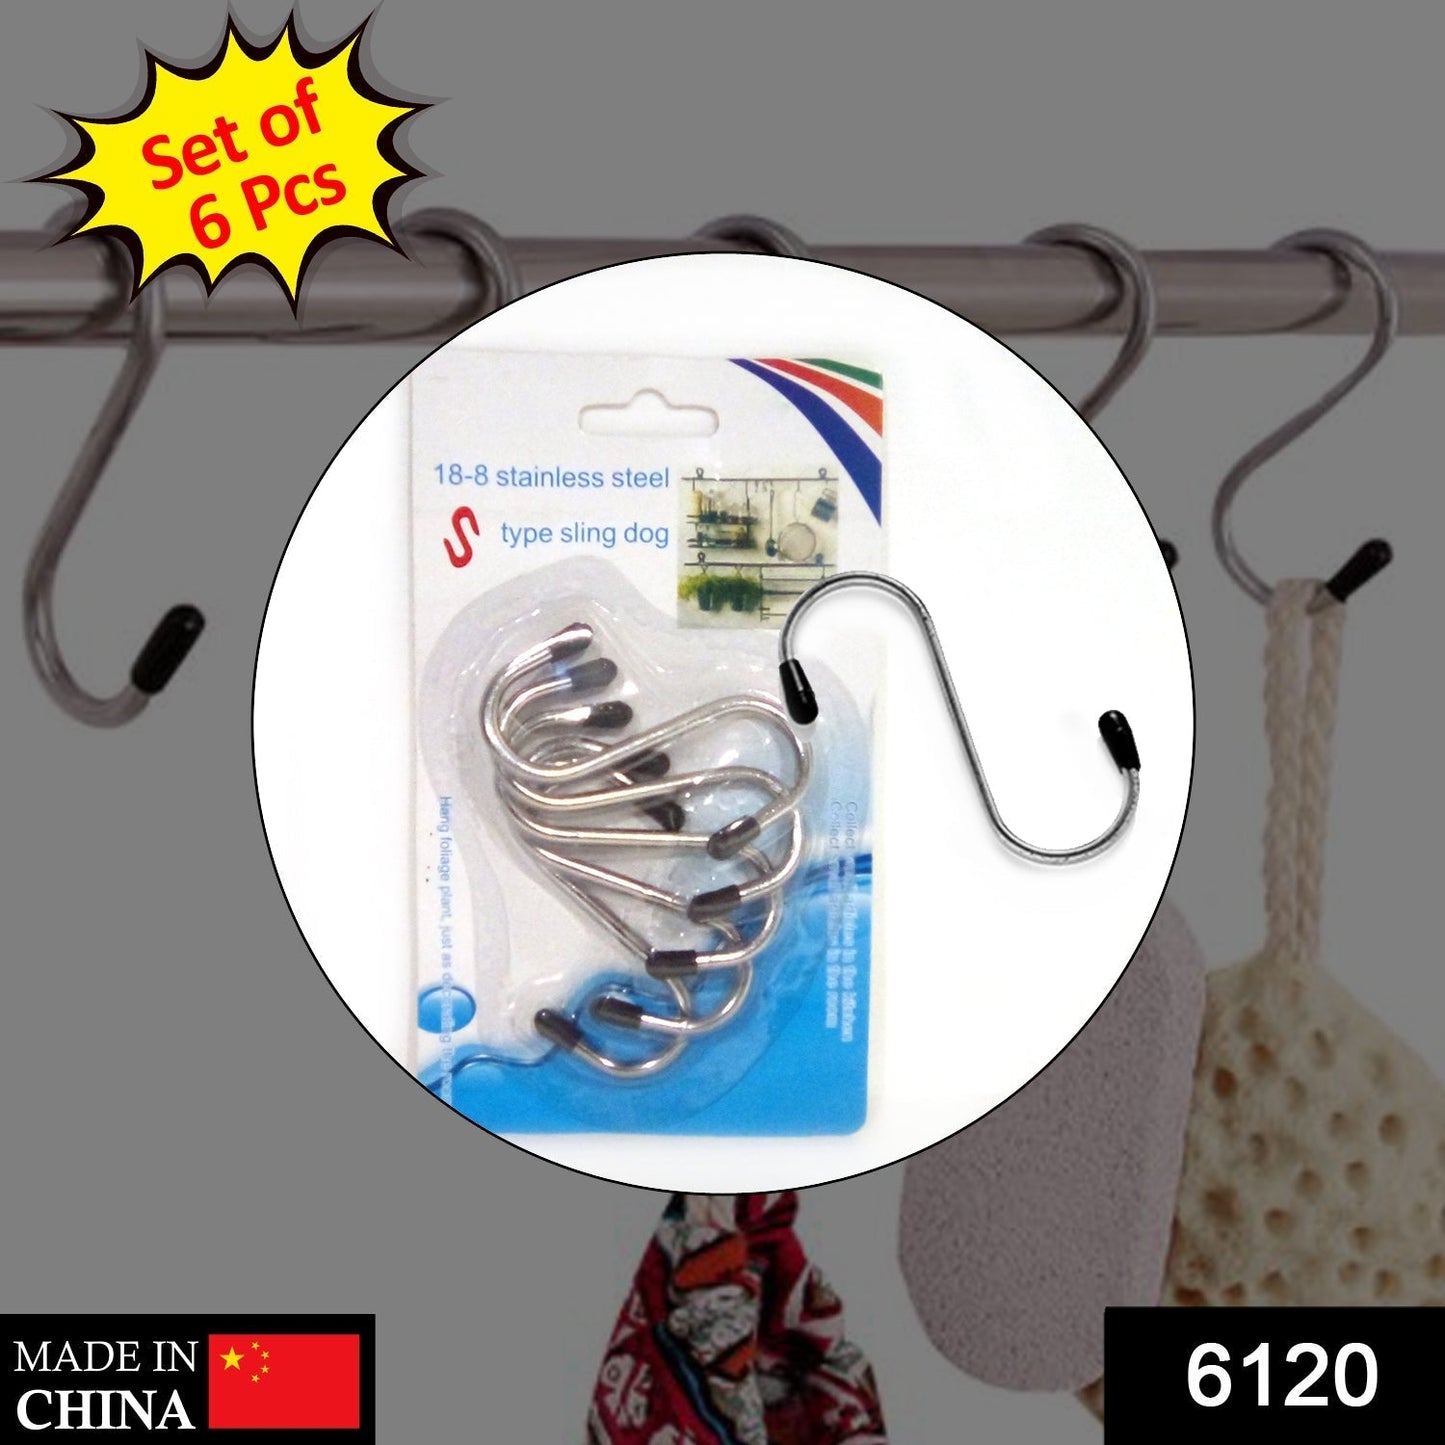 6120 6 Pc S Hanging Hook used in all kinds of places for hanging purposes on walls of such items and materials etc. DeoDap